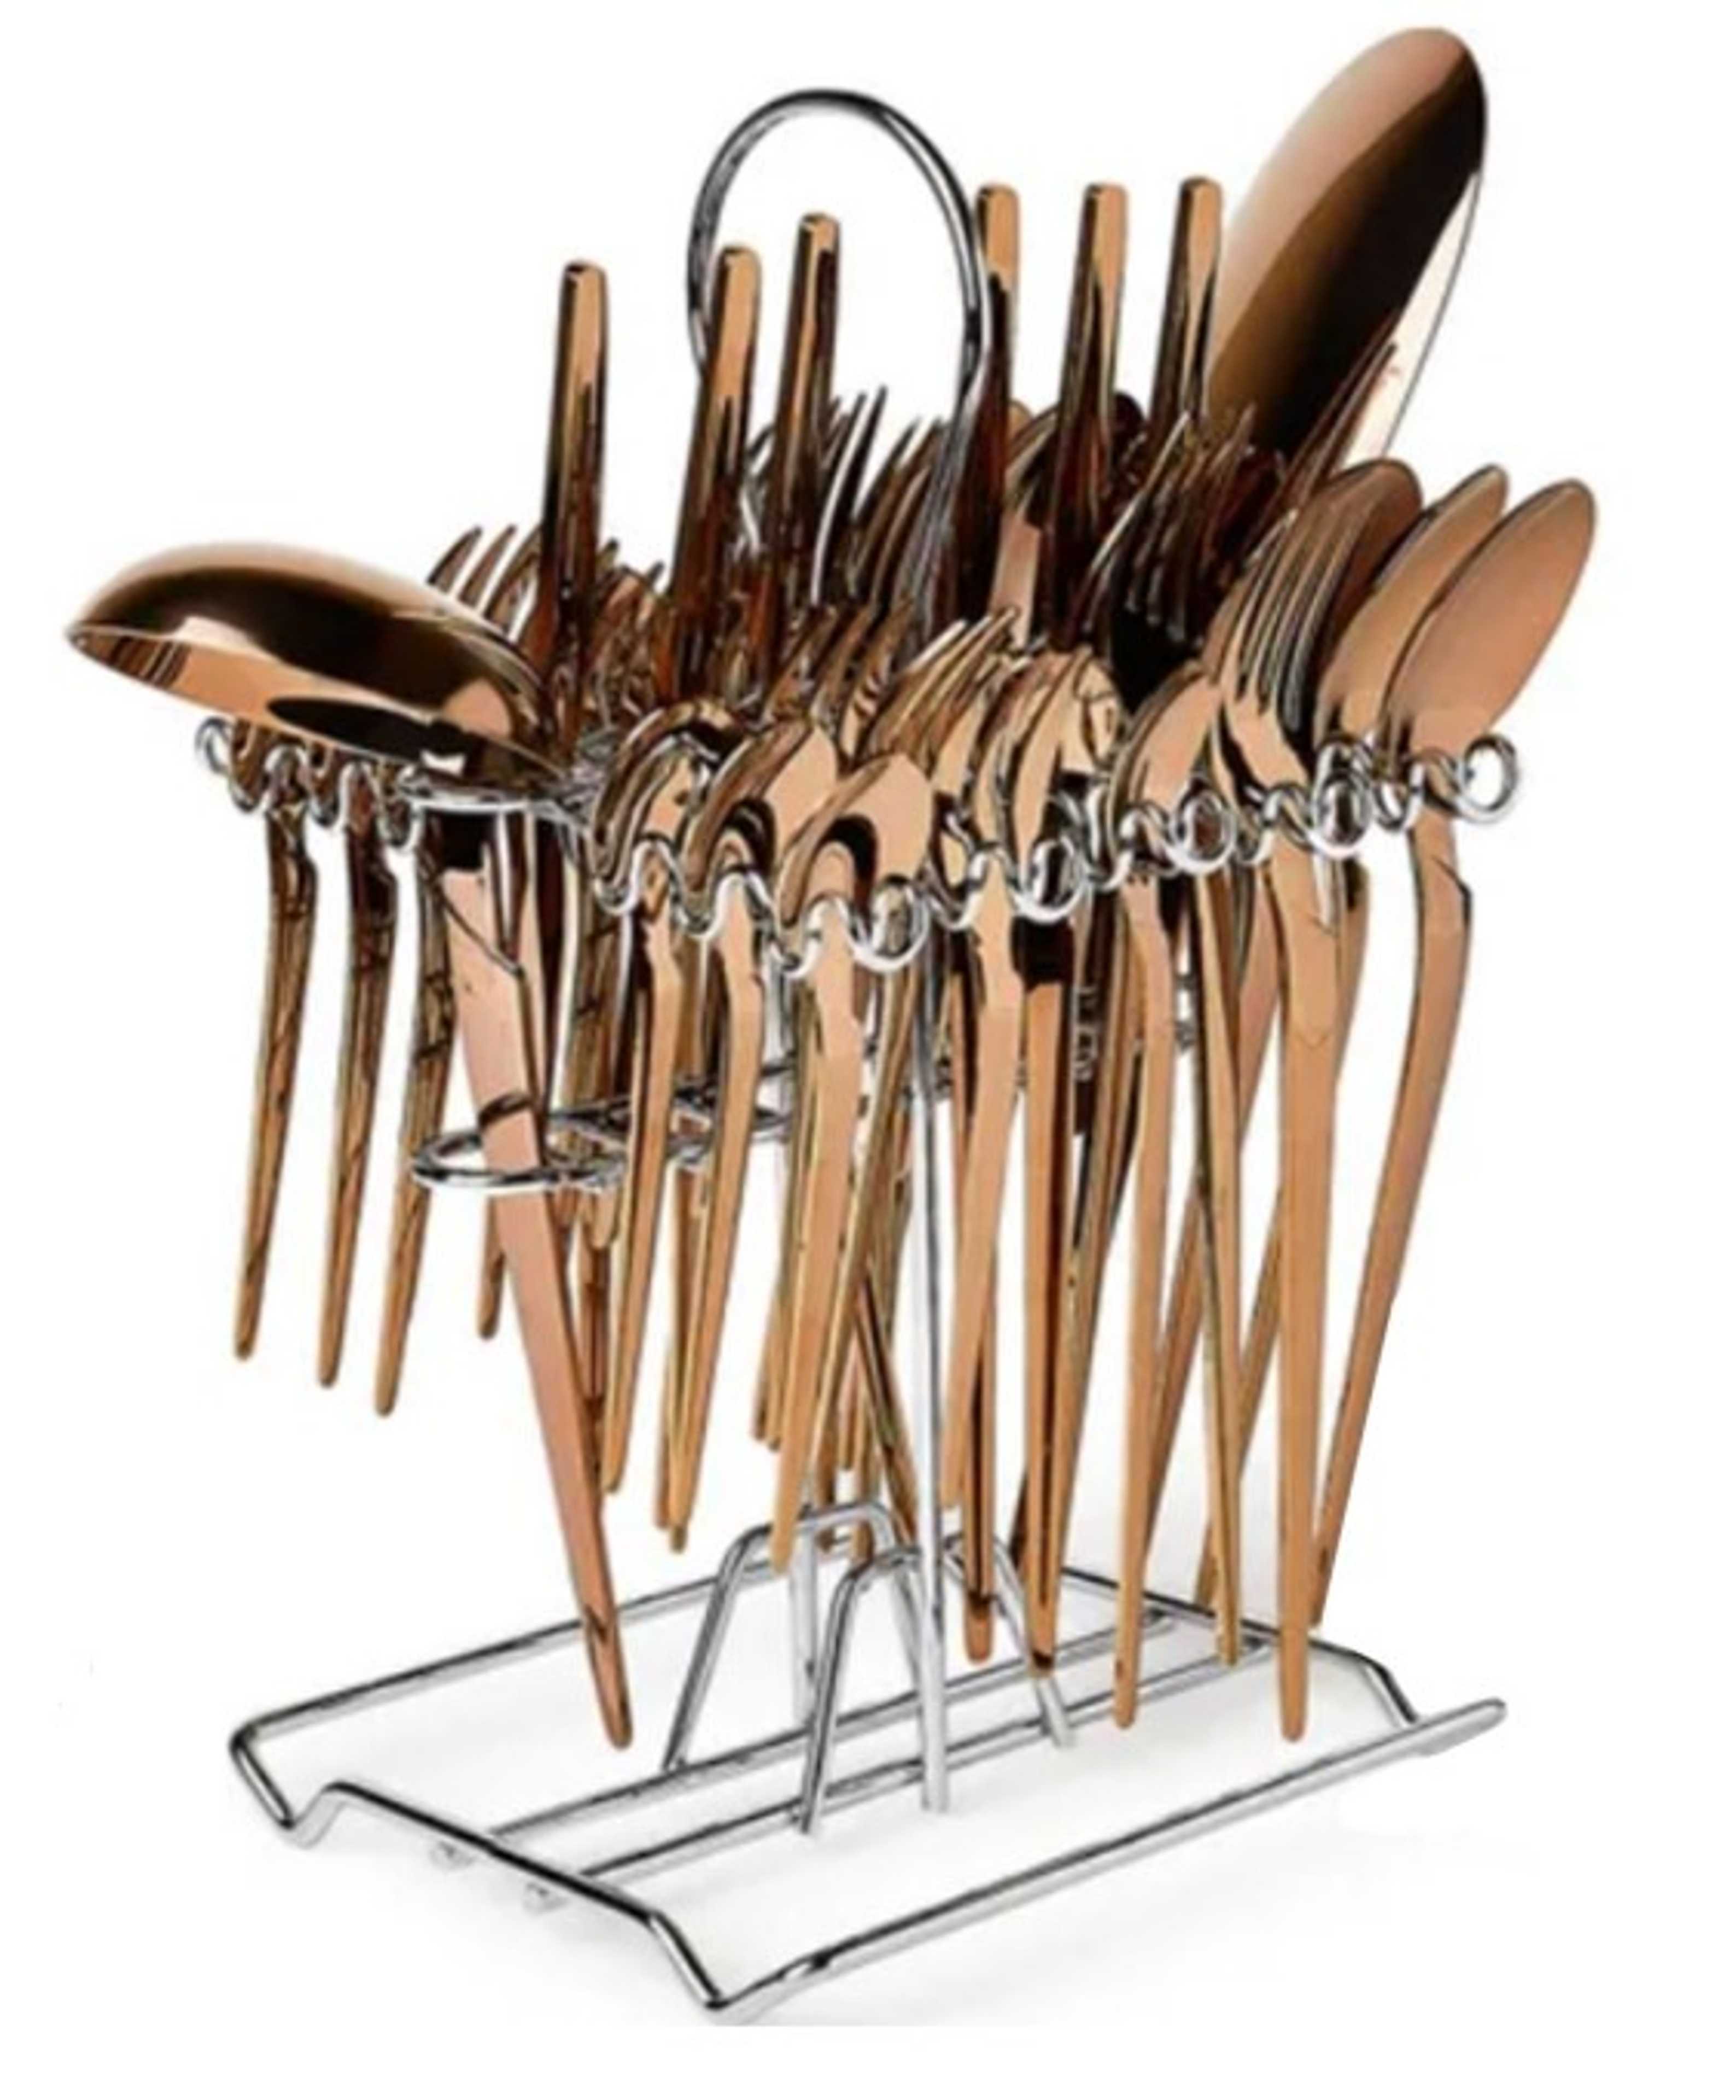 DESSINI IMPORTED HIGH QUALITY STAINLESS STEEL CUTLERY SET 39 PCS WITH STAND FOR HOME AND KITCHEN